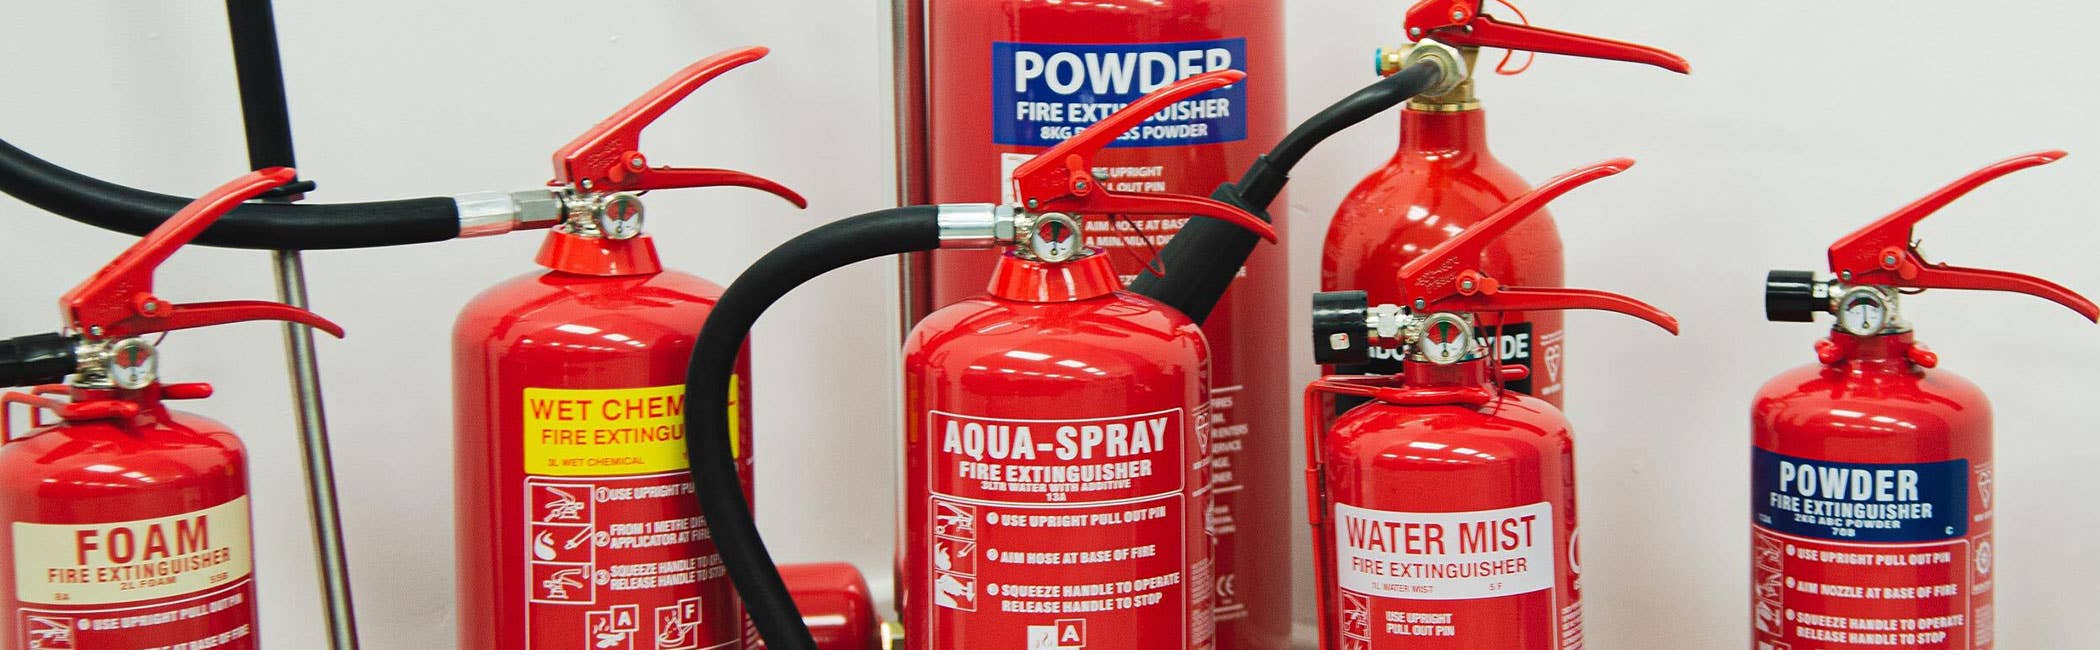 What are the different types of fire extinguisher?